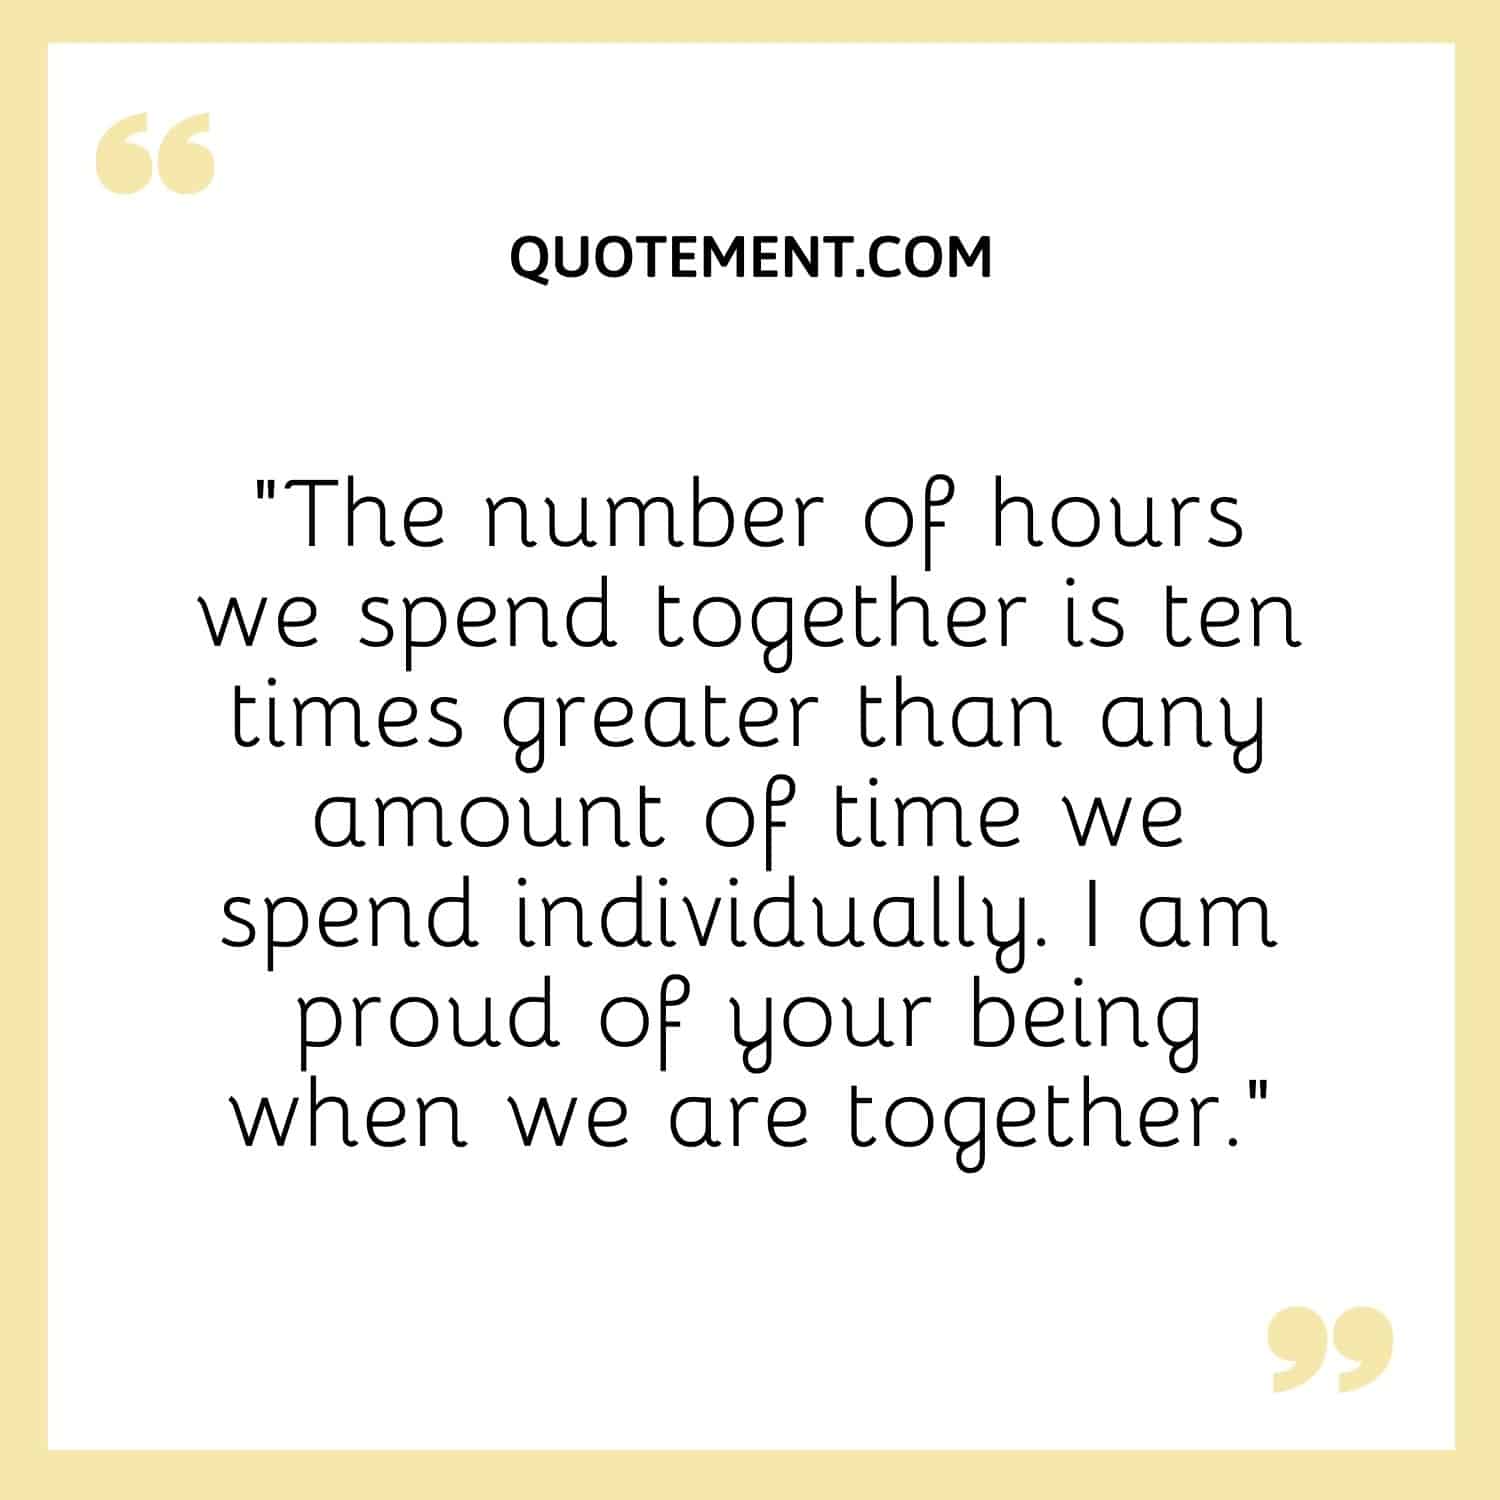 “The number of hours we spend together is ten times greater than any amount of time we spend individually. I am proud of your being when we are together.”